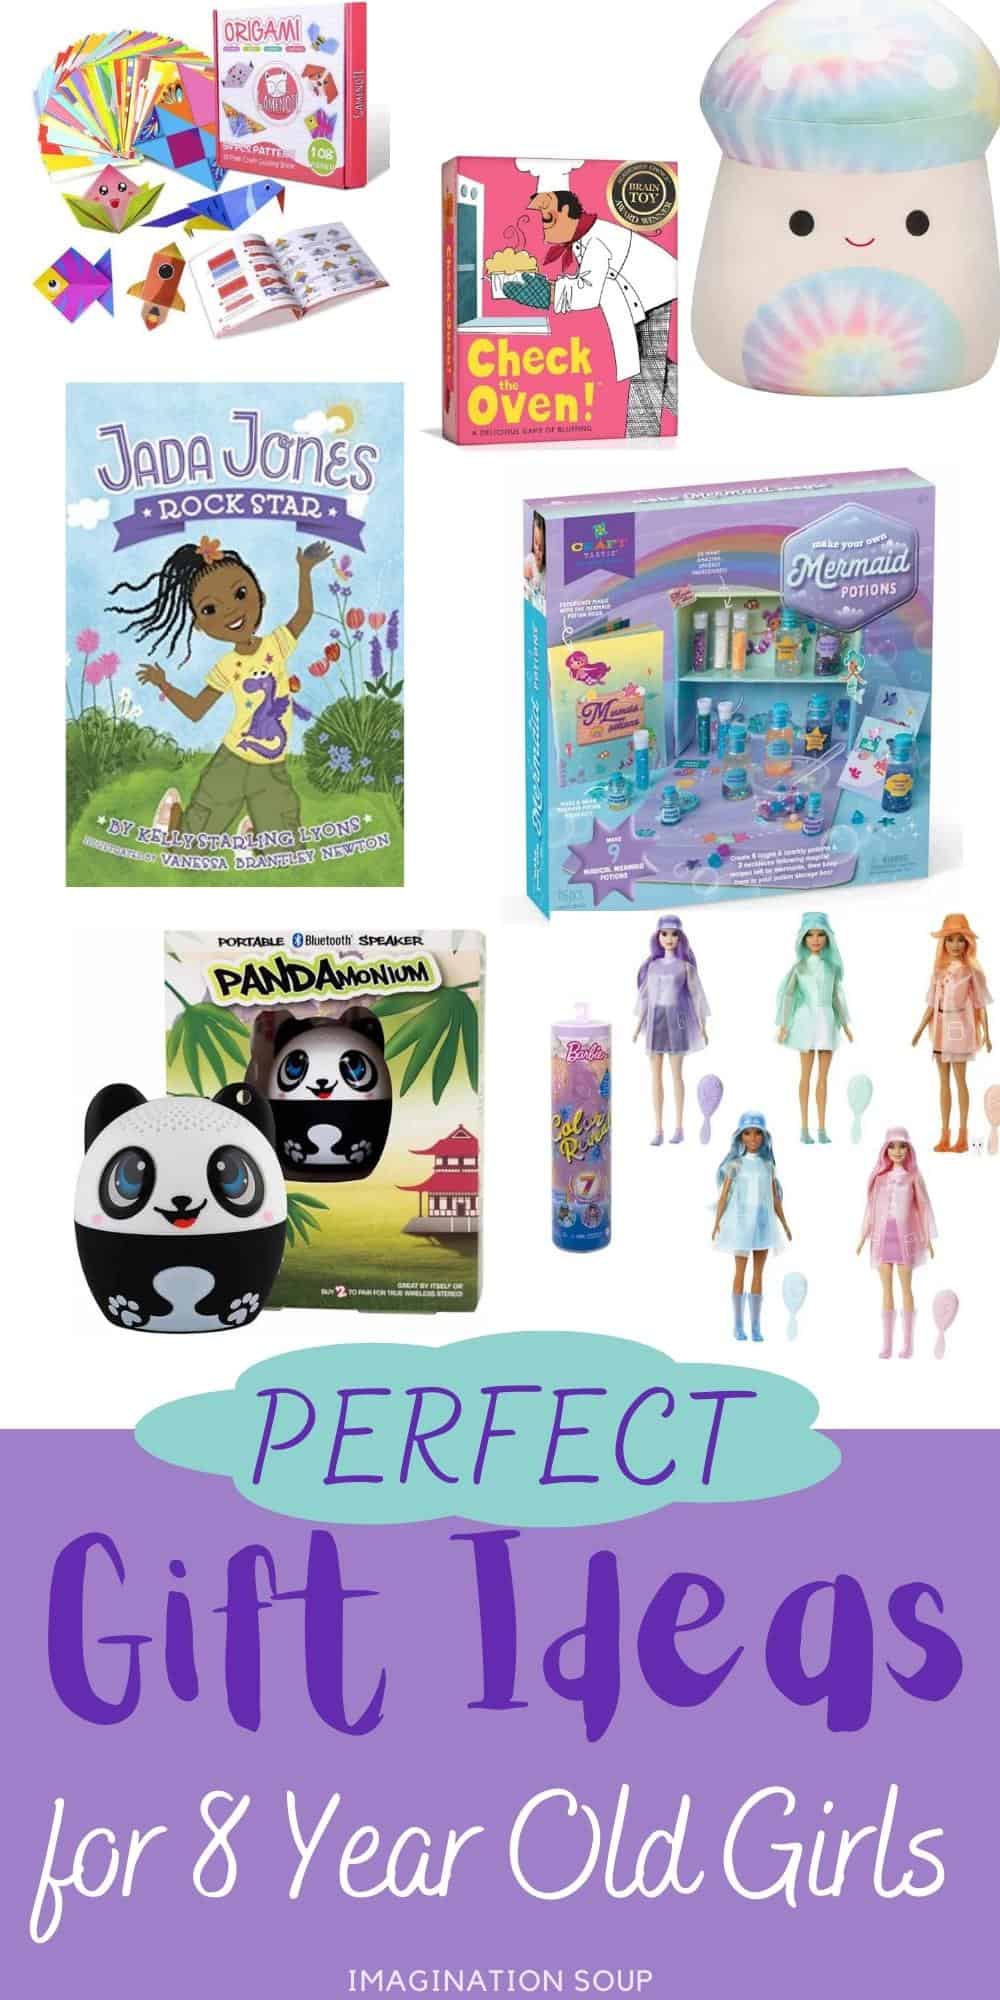 Perfect gift ideas for 8 year old girls